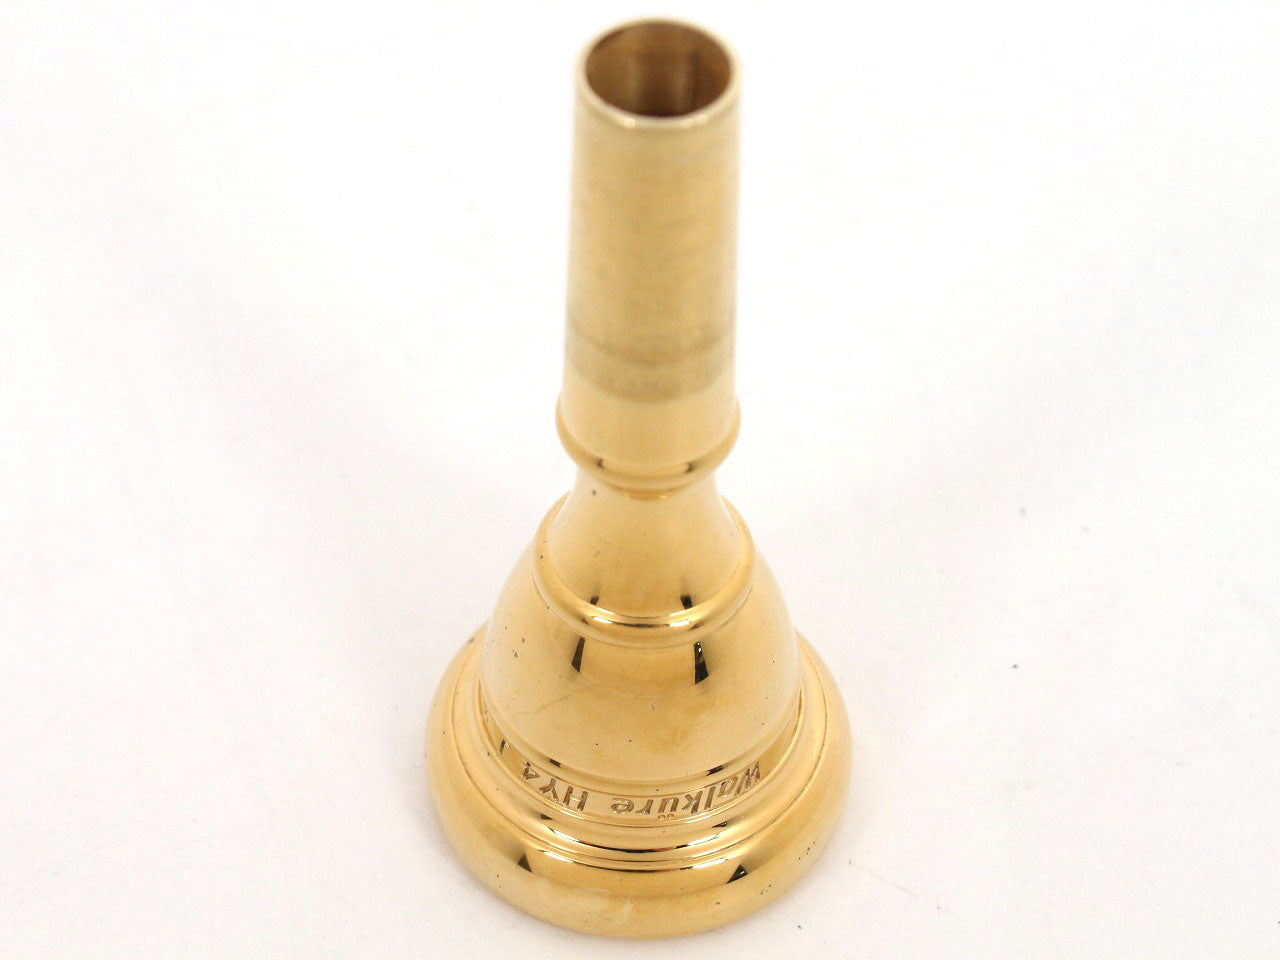 USED Willie's / Walkure HY4J3 GP for trombone mouthpiece for fat pipe [09]